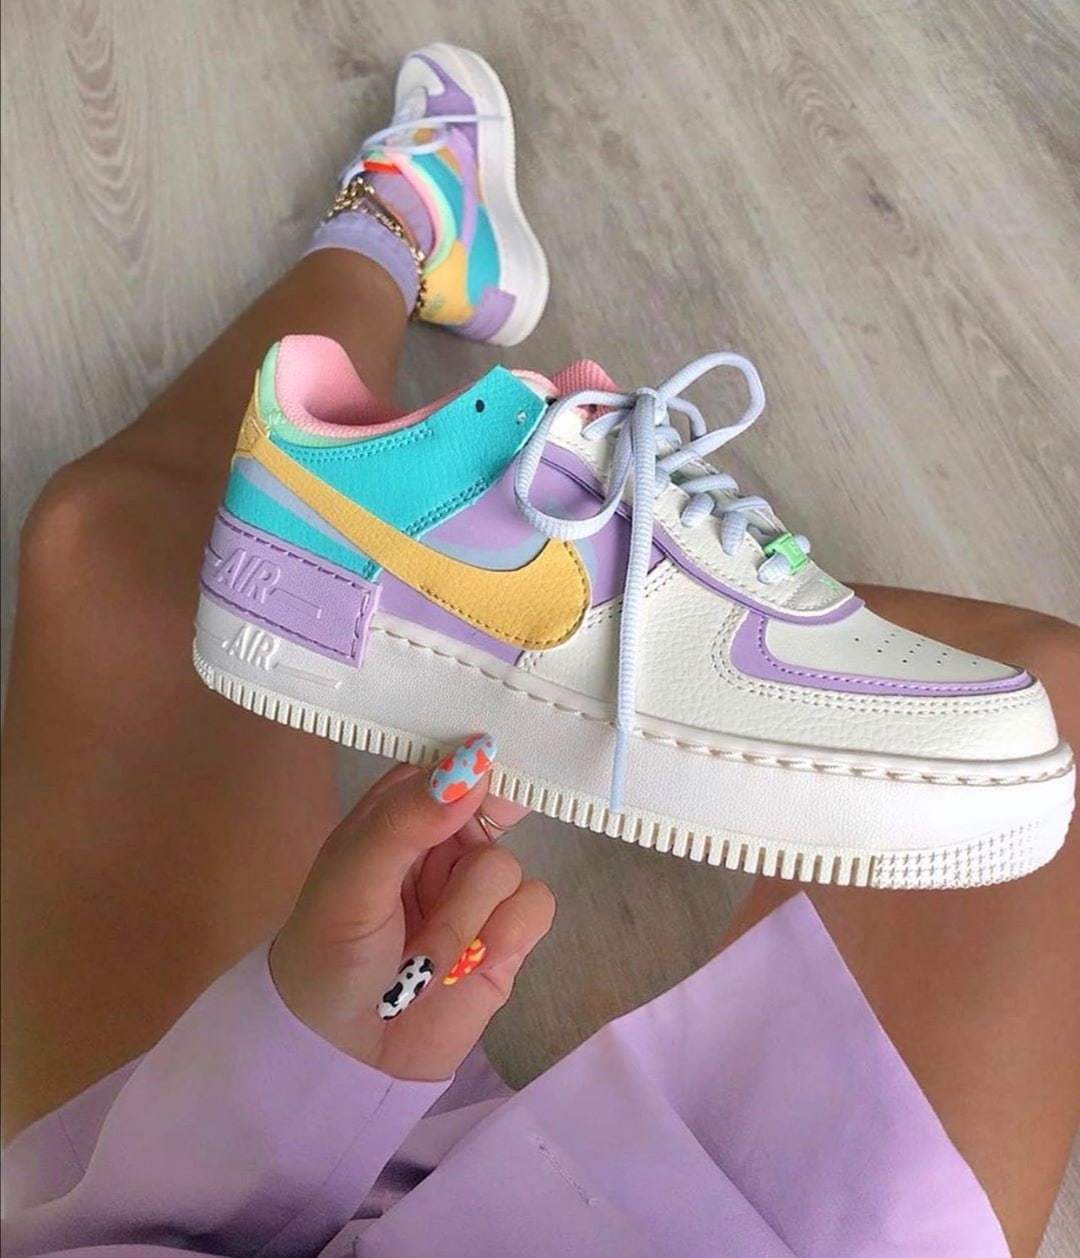 nike af1 shadow air force 1 pale ivory gold purple wmns